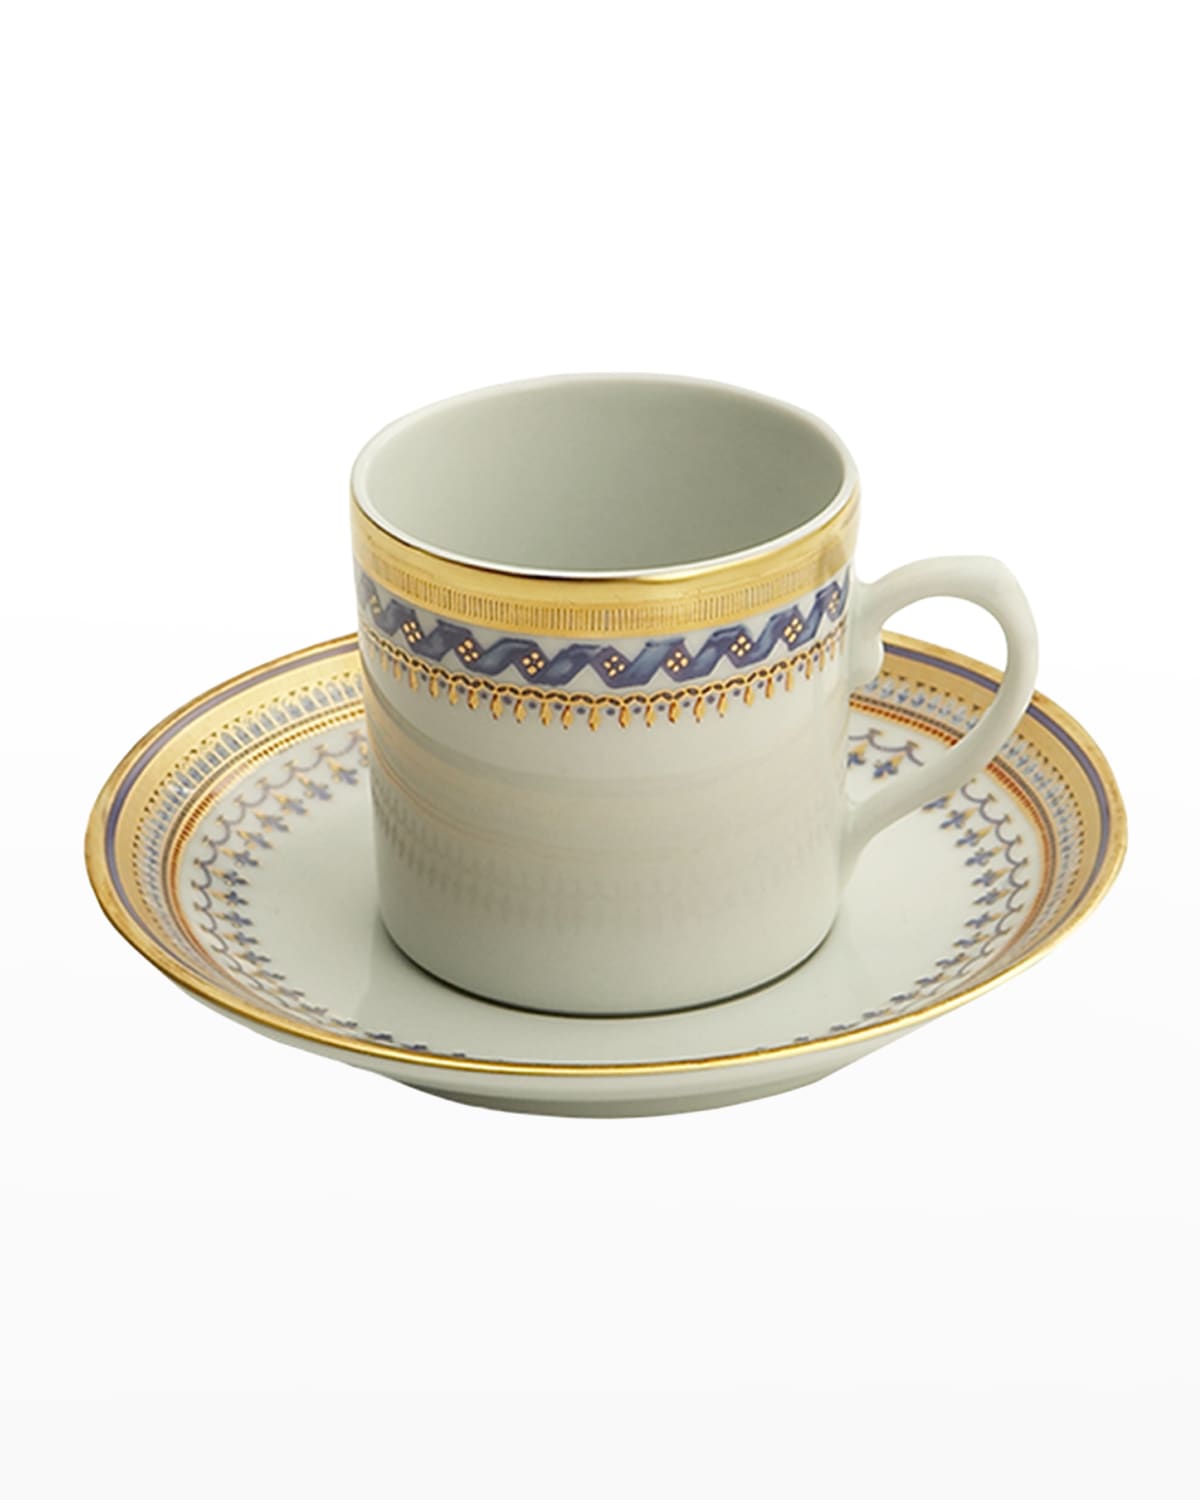 Mottahedeh Chinoise Blue Tea Cup W/ Saucer In Multi